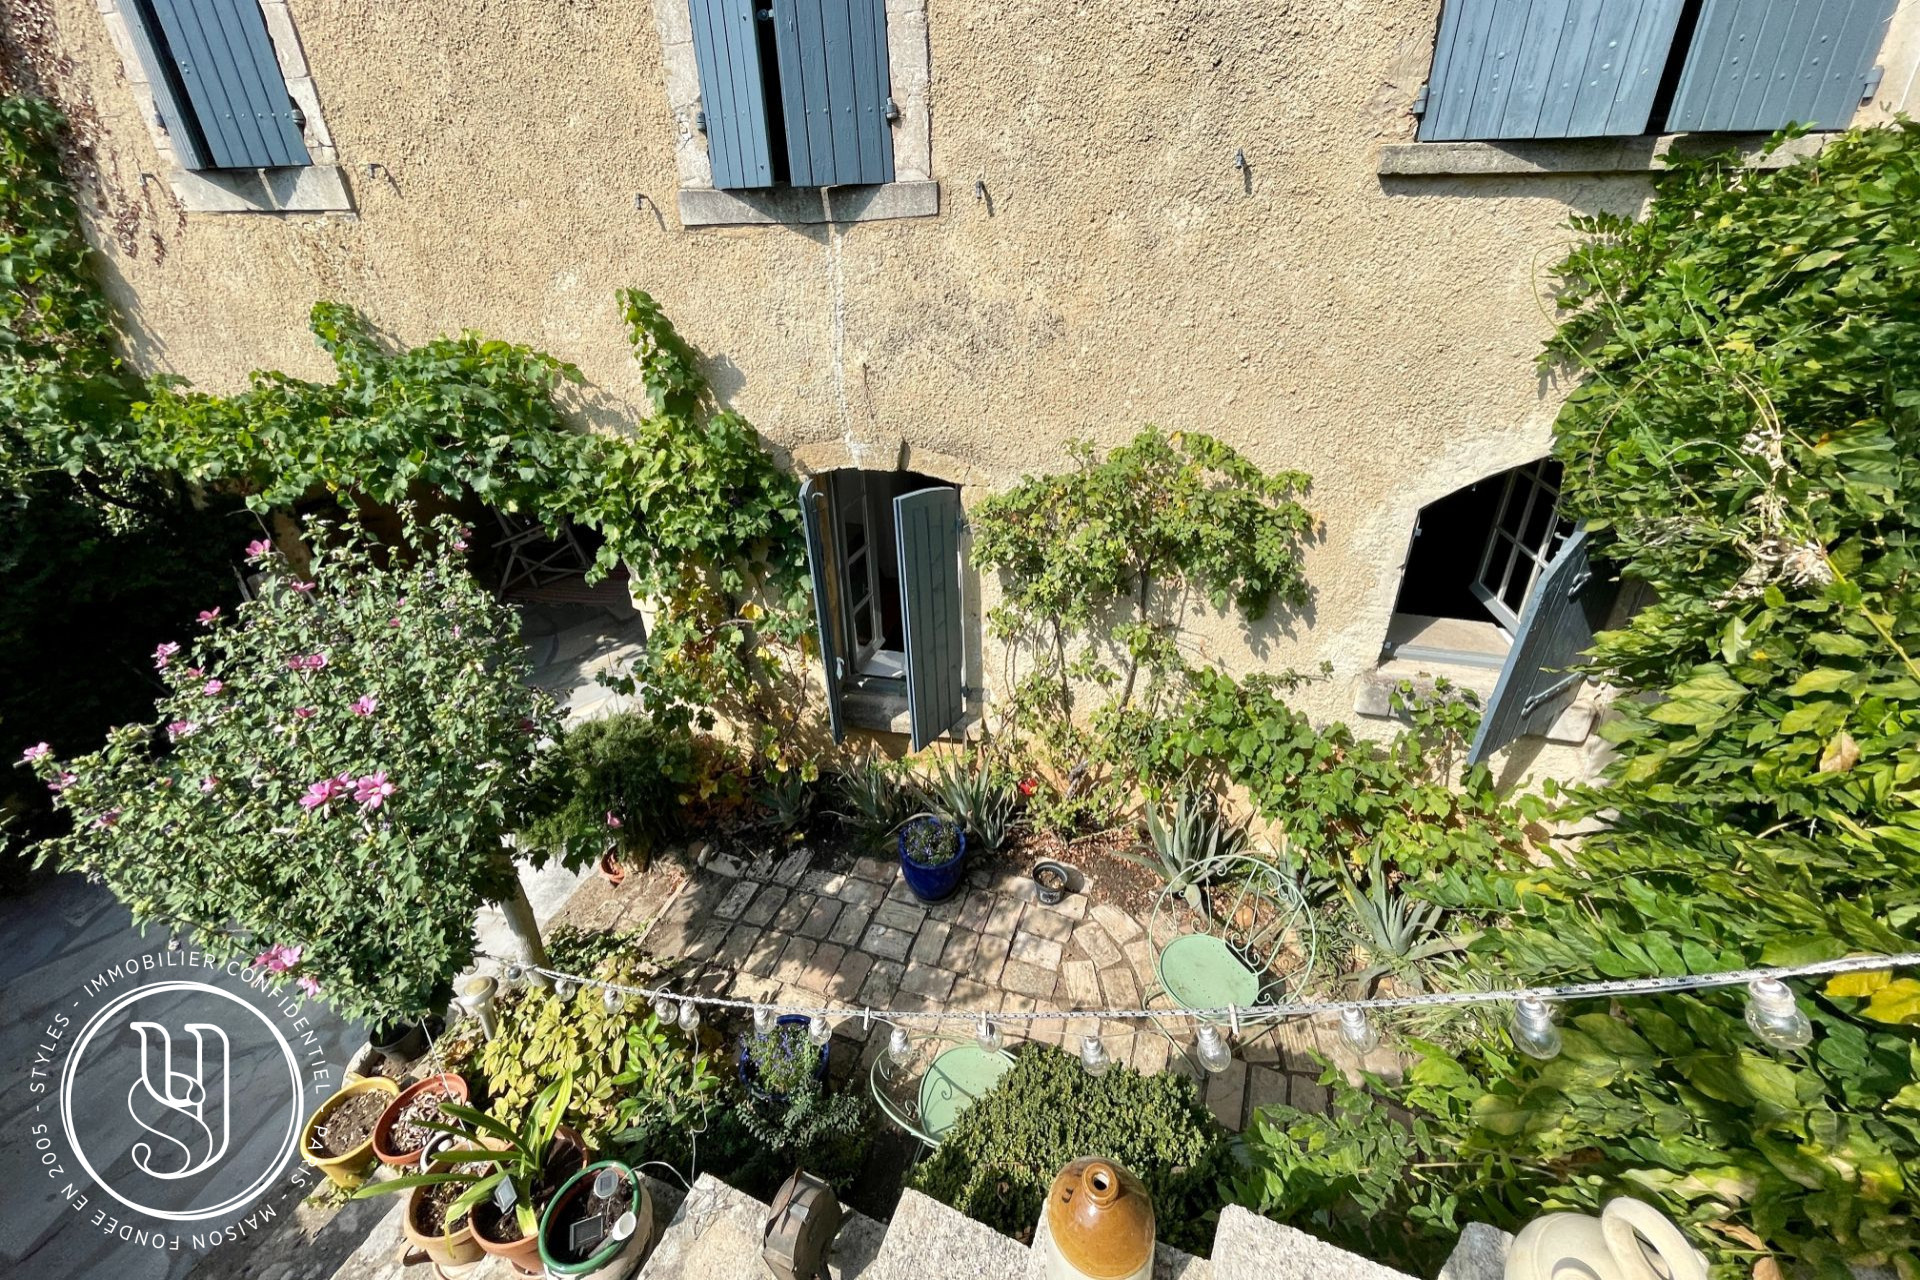 Uzès - surroundings - A charming house in a village with amenities - image 2